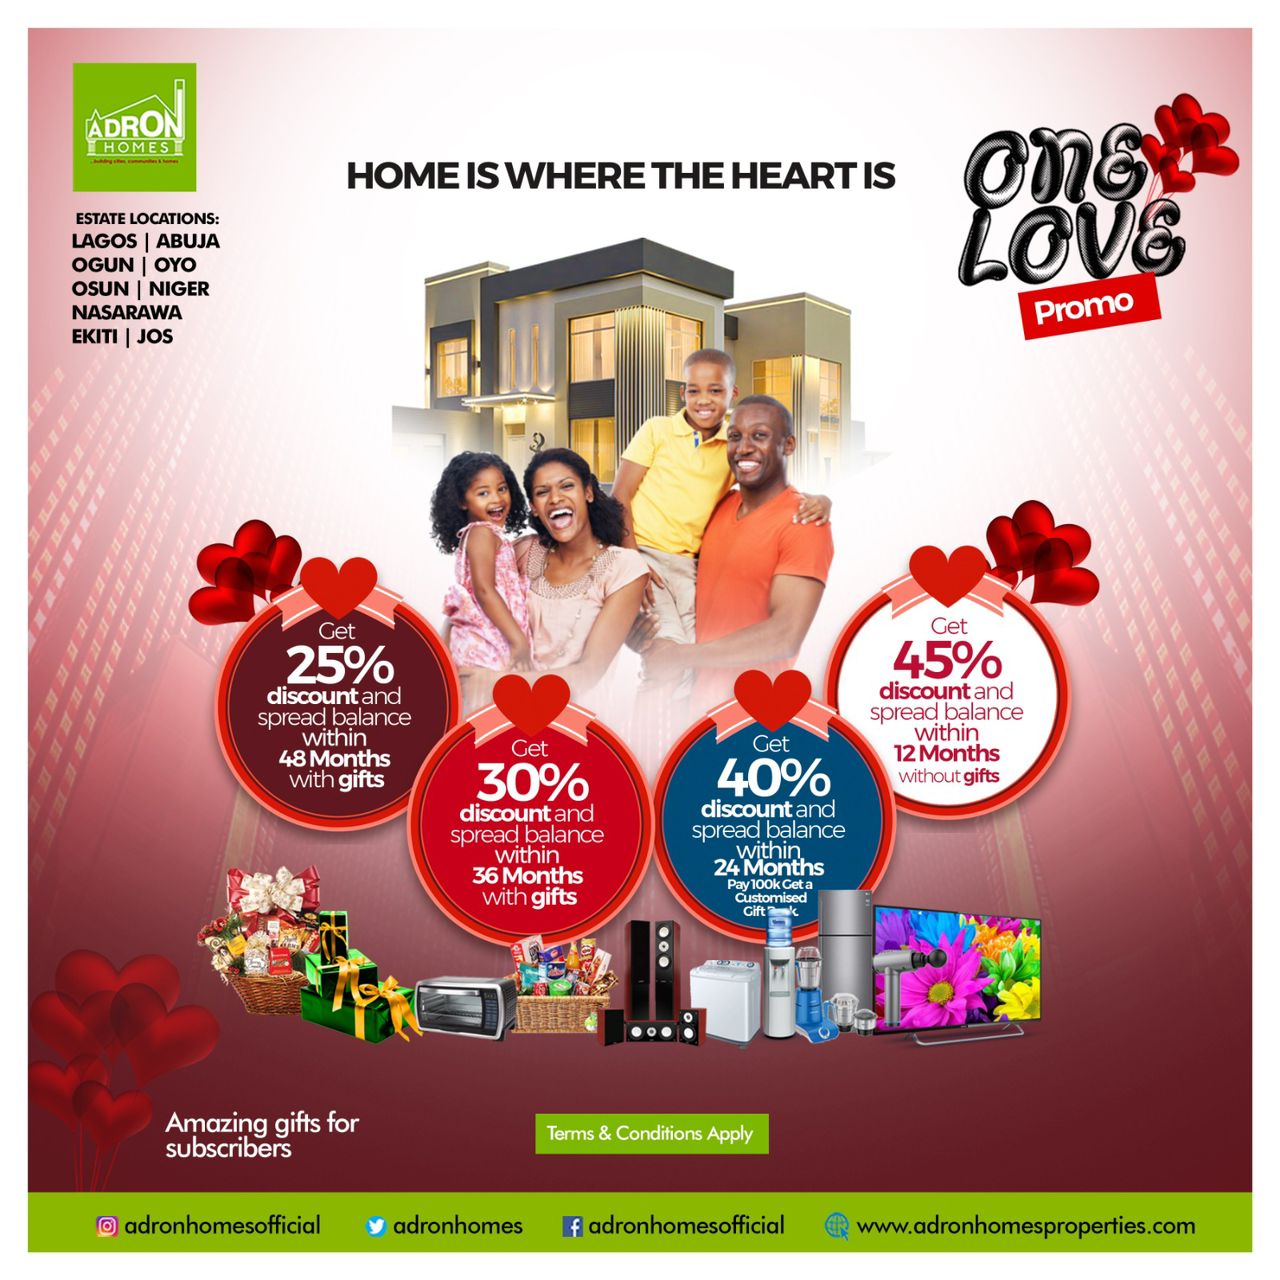 Embrace the Romance of Homeownership with Adron Homes' ONE LOVE PROMO